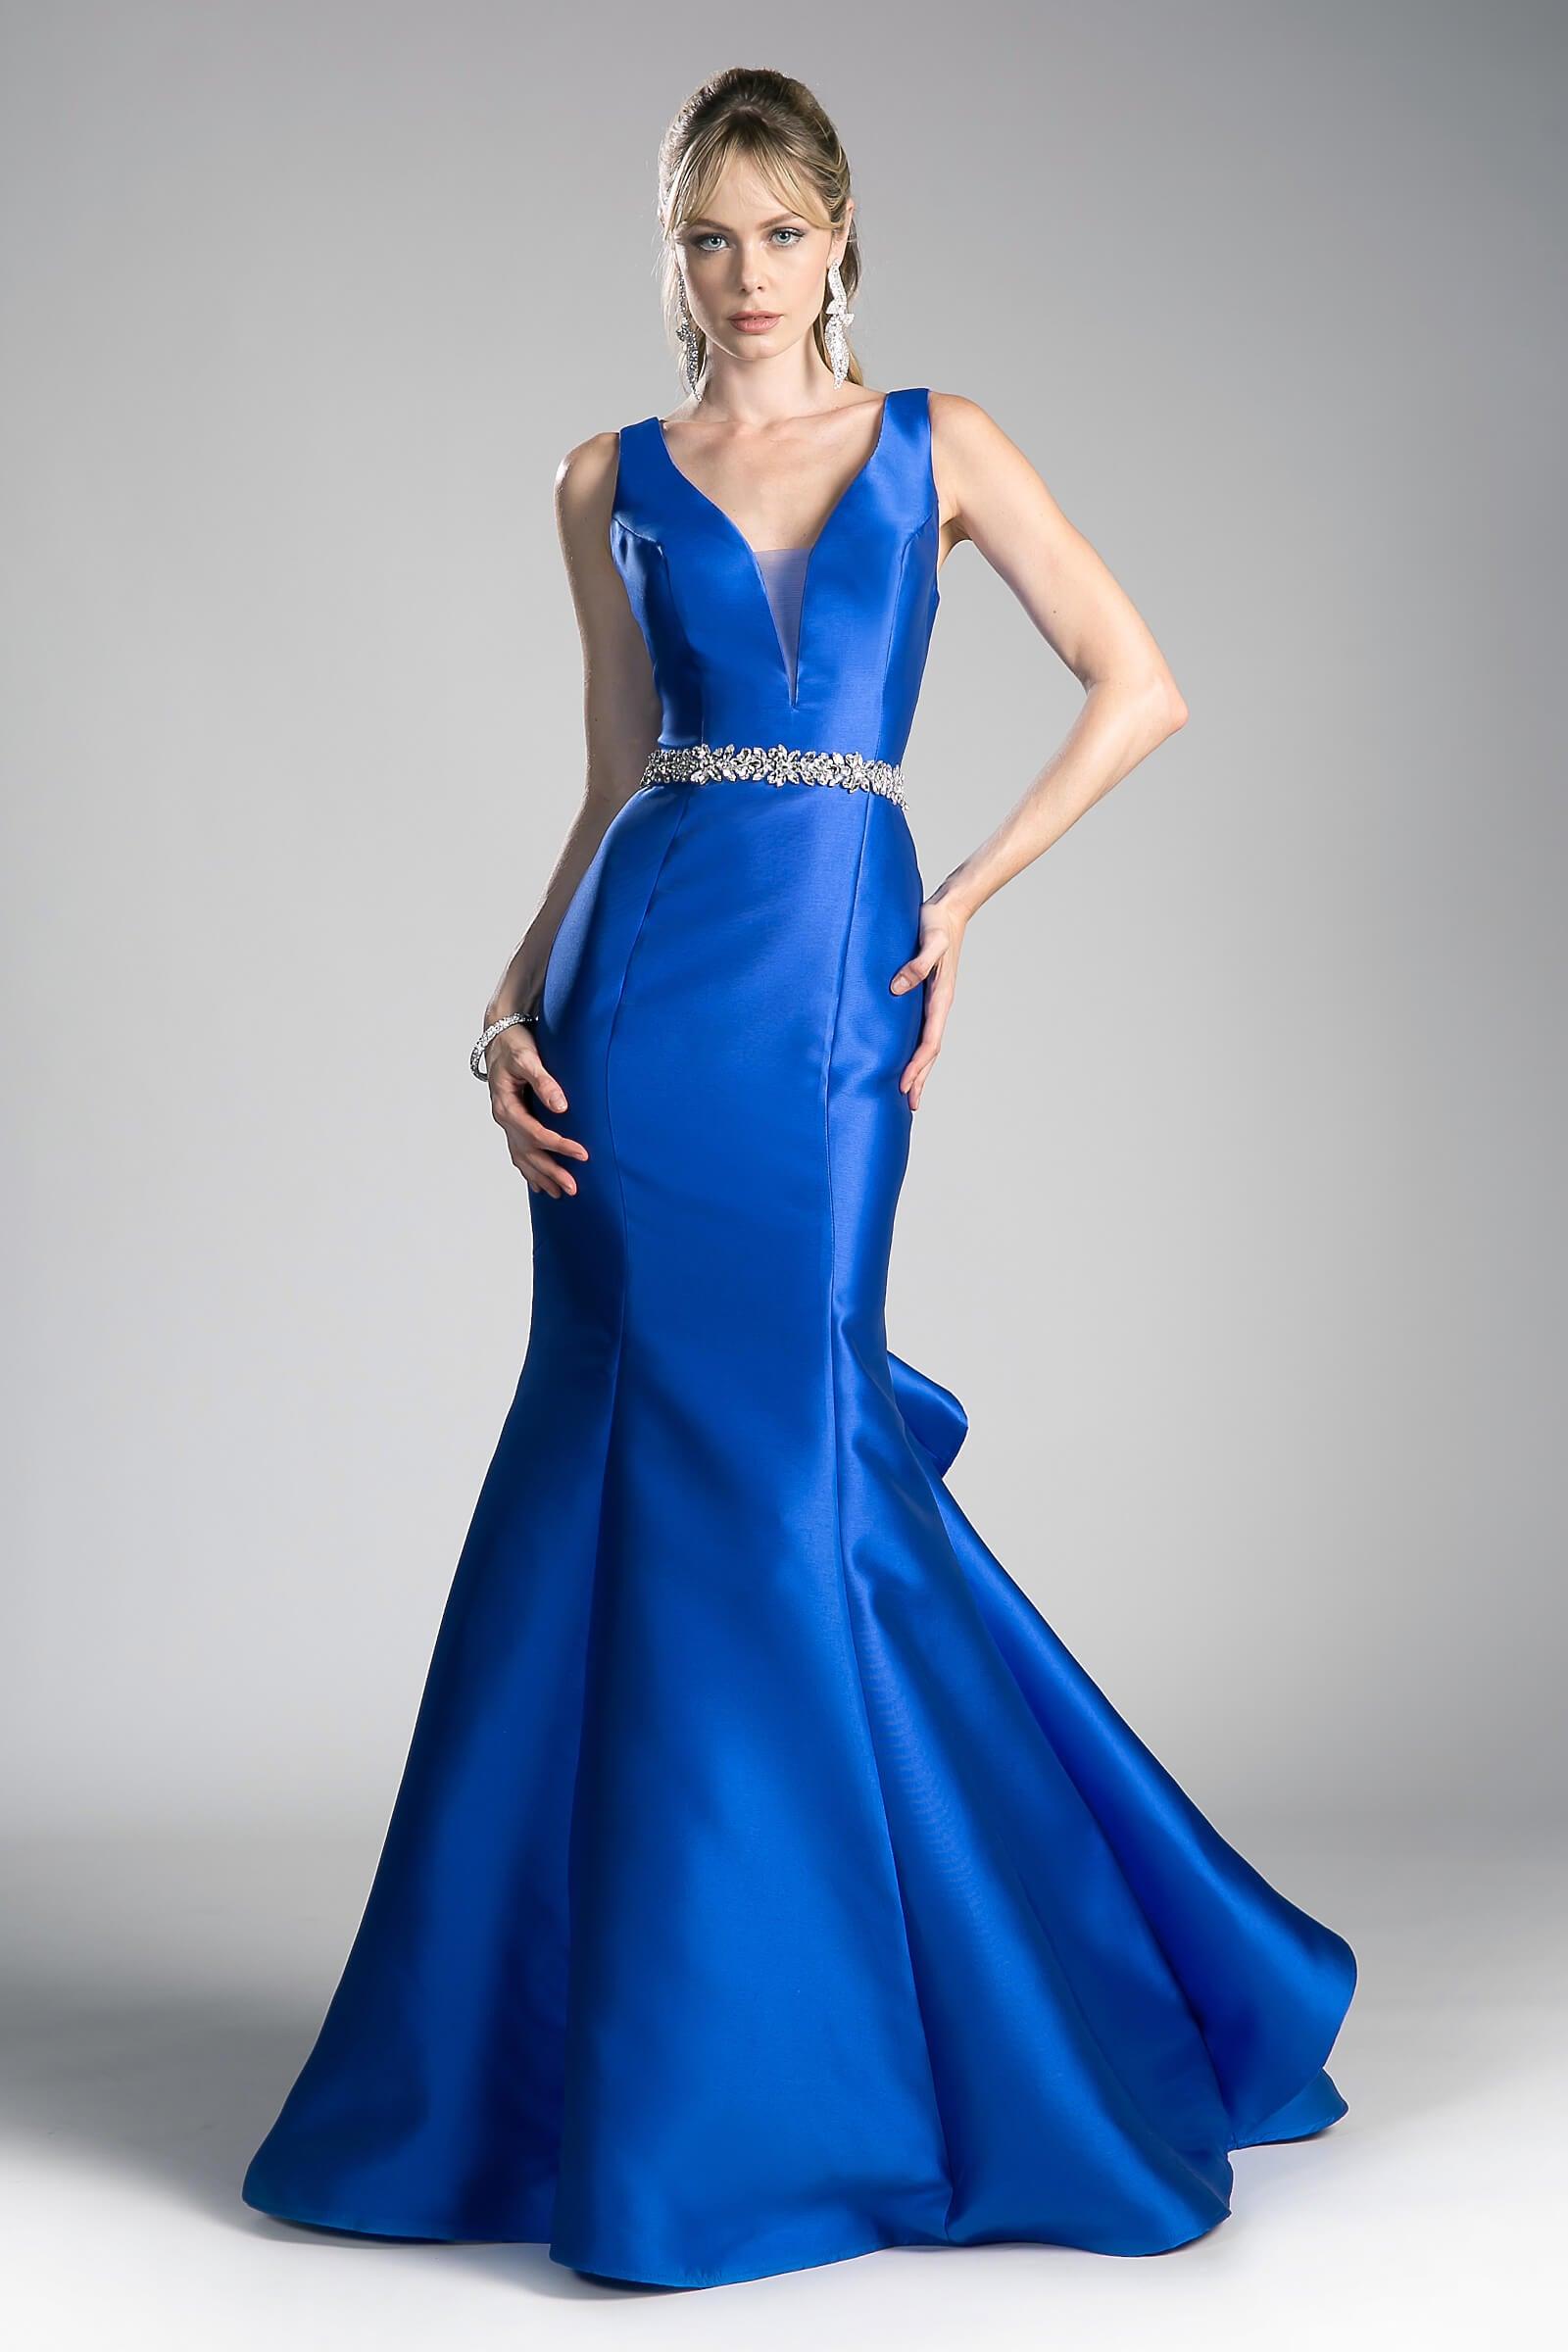 Prom Long Sleeveless Mermaid Evening Gown - The Dress Outlet Cinderella Divine